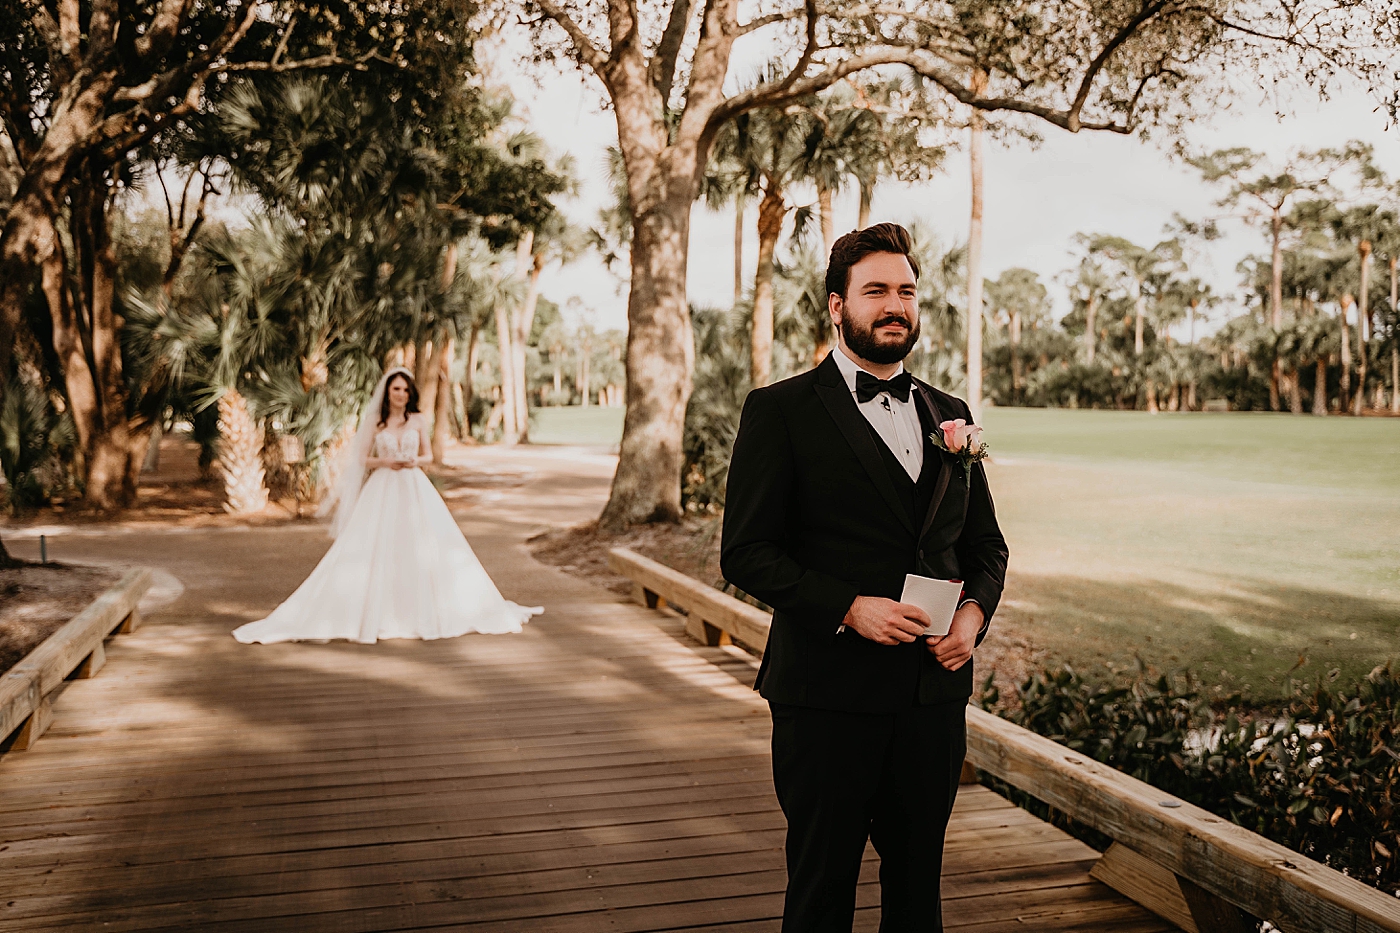 First Look with Bride approaching Groom with back turned on bridge Breakers West Wedding Photography captured by South Florida Wedding Photographer Krystal Capone Photography 